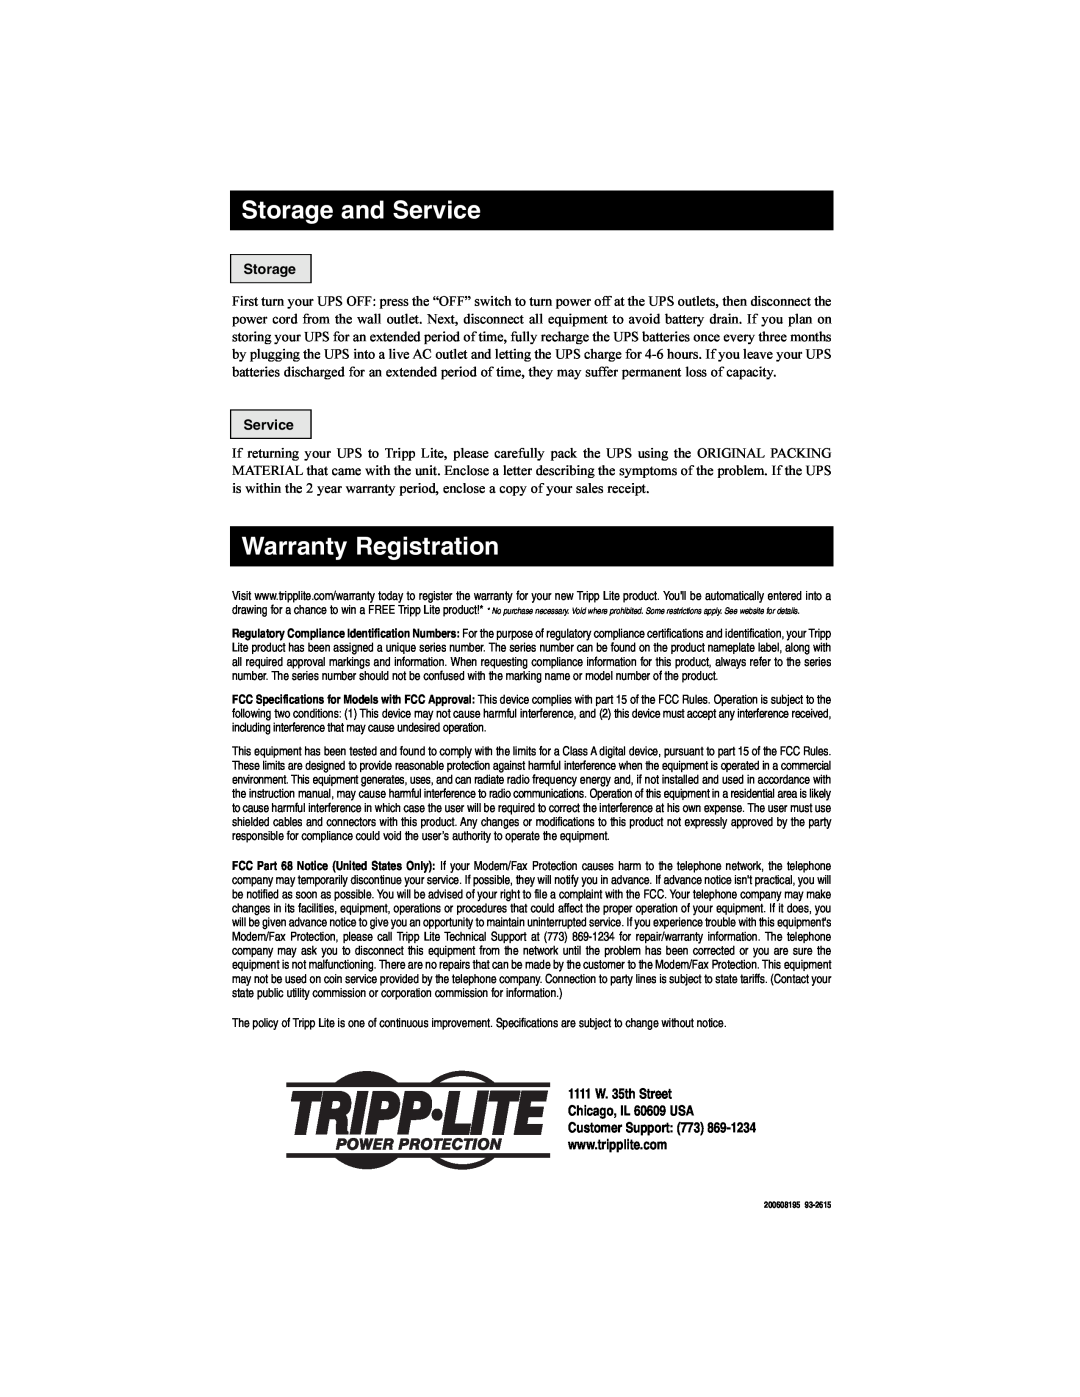 Tripp Lite Audio/Video Pure Sine Wave UPS Systems owner manual Storage and Service, Warranty Registration 